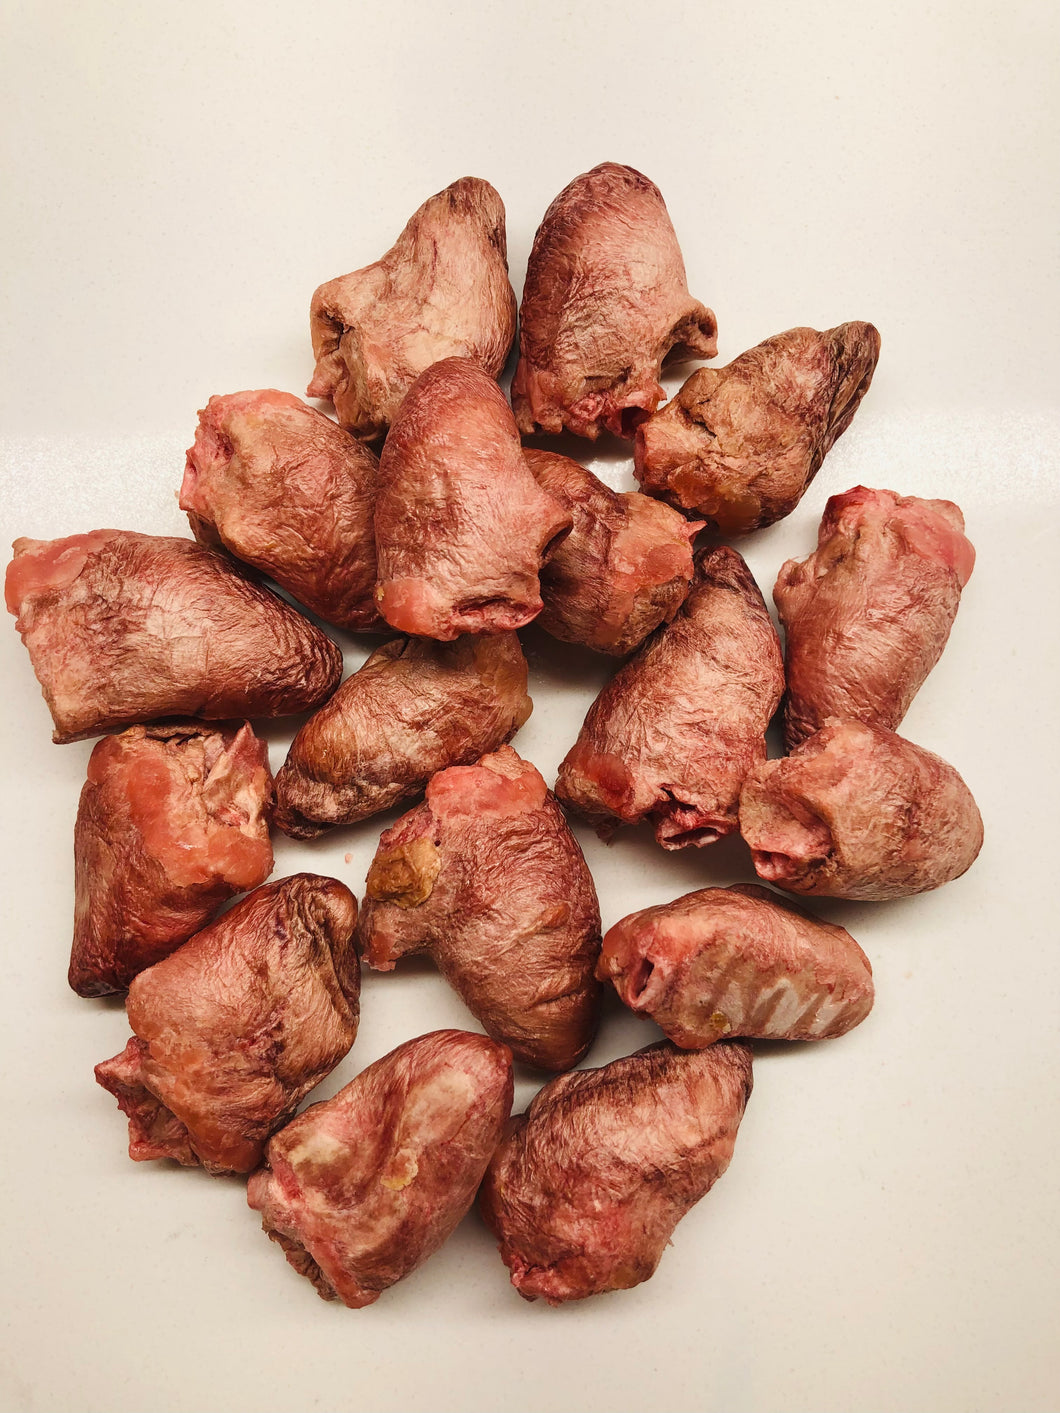 Chicken Hearts Freeze Dried